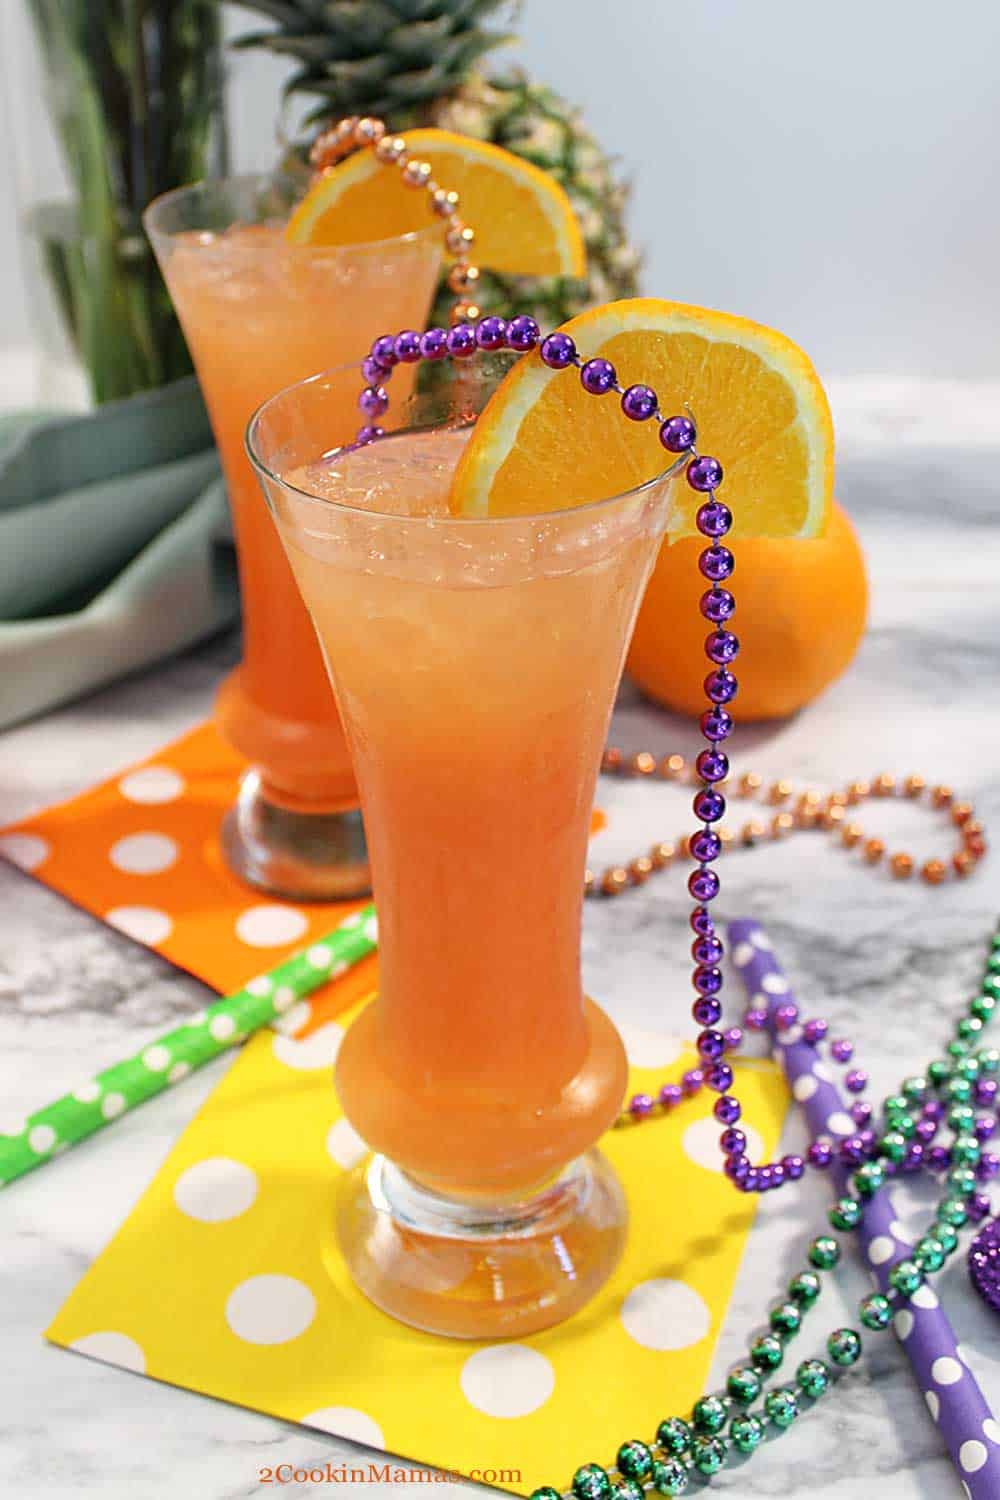 Hurricane Cocktail | 2 Cookin Mamas This tropical hurricane cocktail will transport you to a Caribbean island. Light & dark rum combine with orange & pineapple juices for a fresh fruity drink. #rumcocktail #MadriGras #tropicalcocktail #cocktail #fruitycocktail #drink #recipe #punch